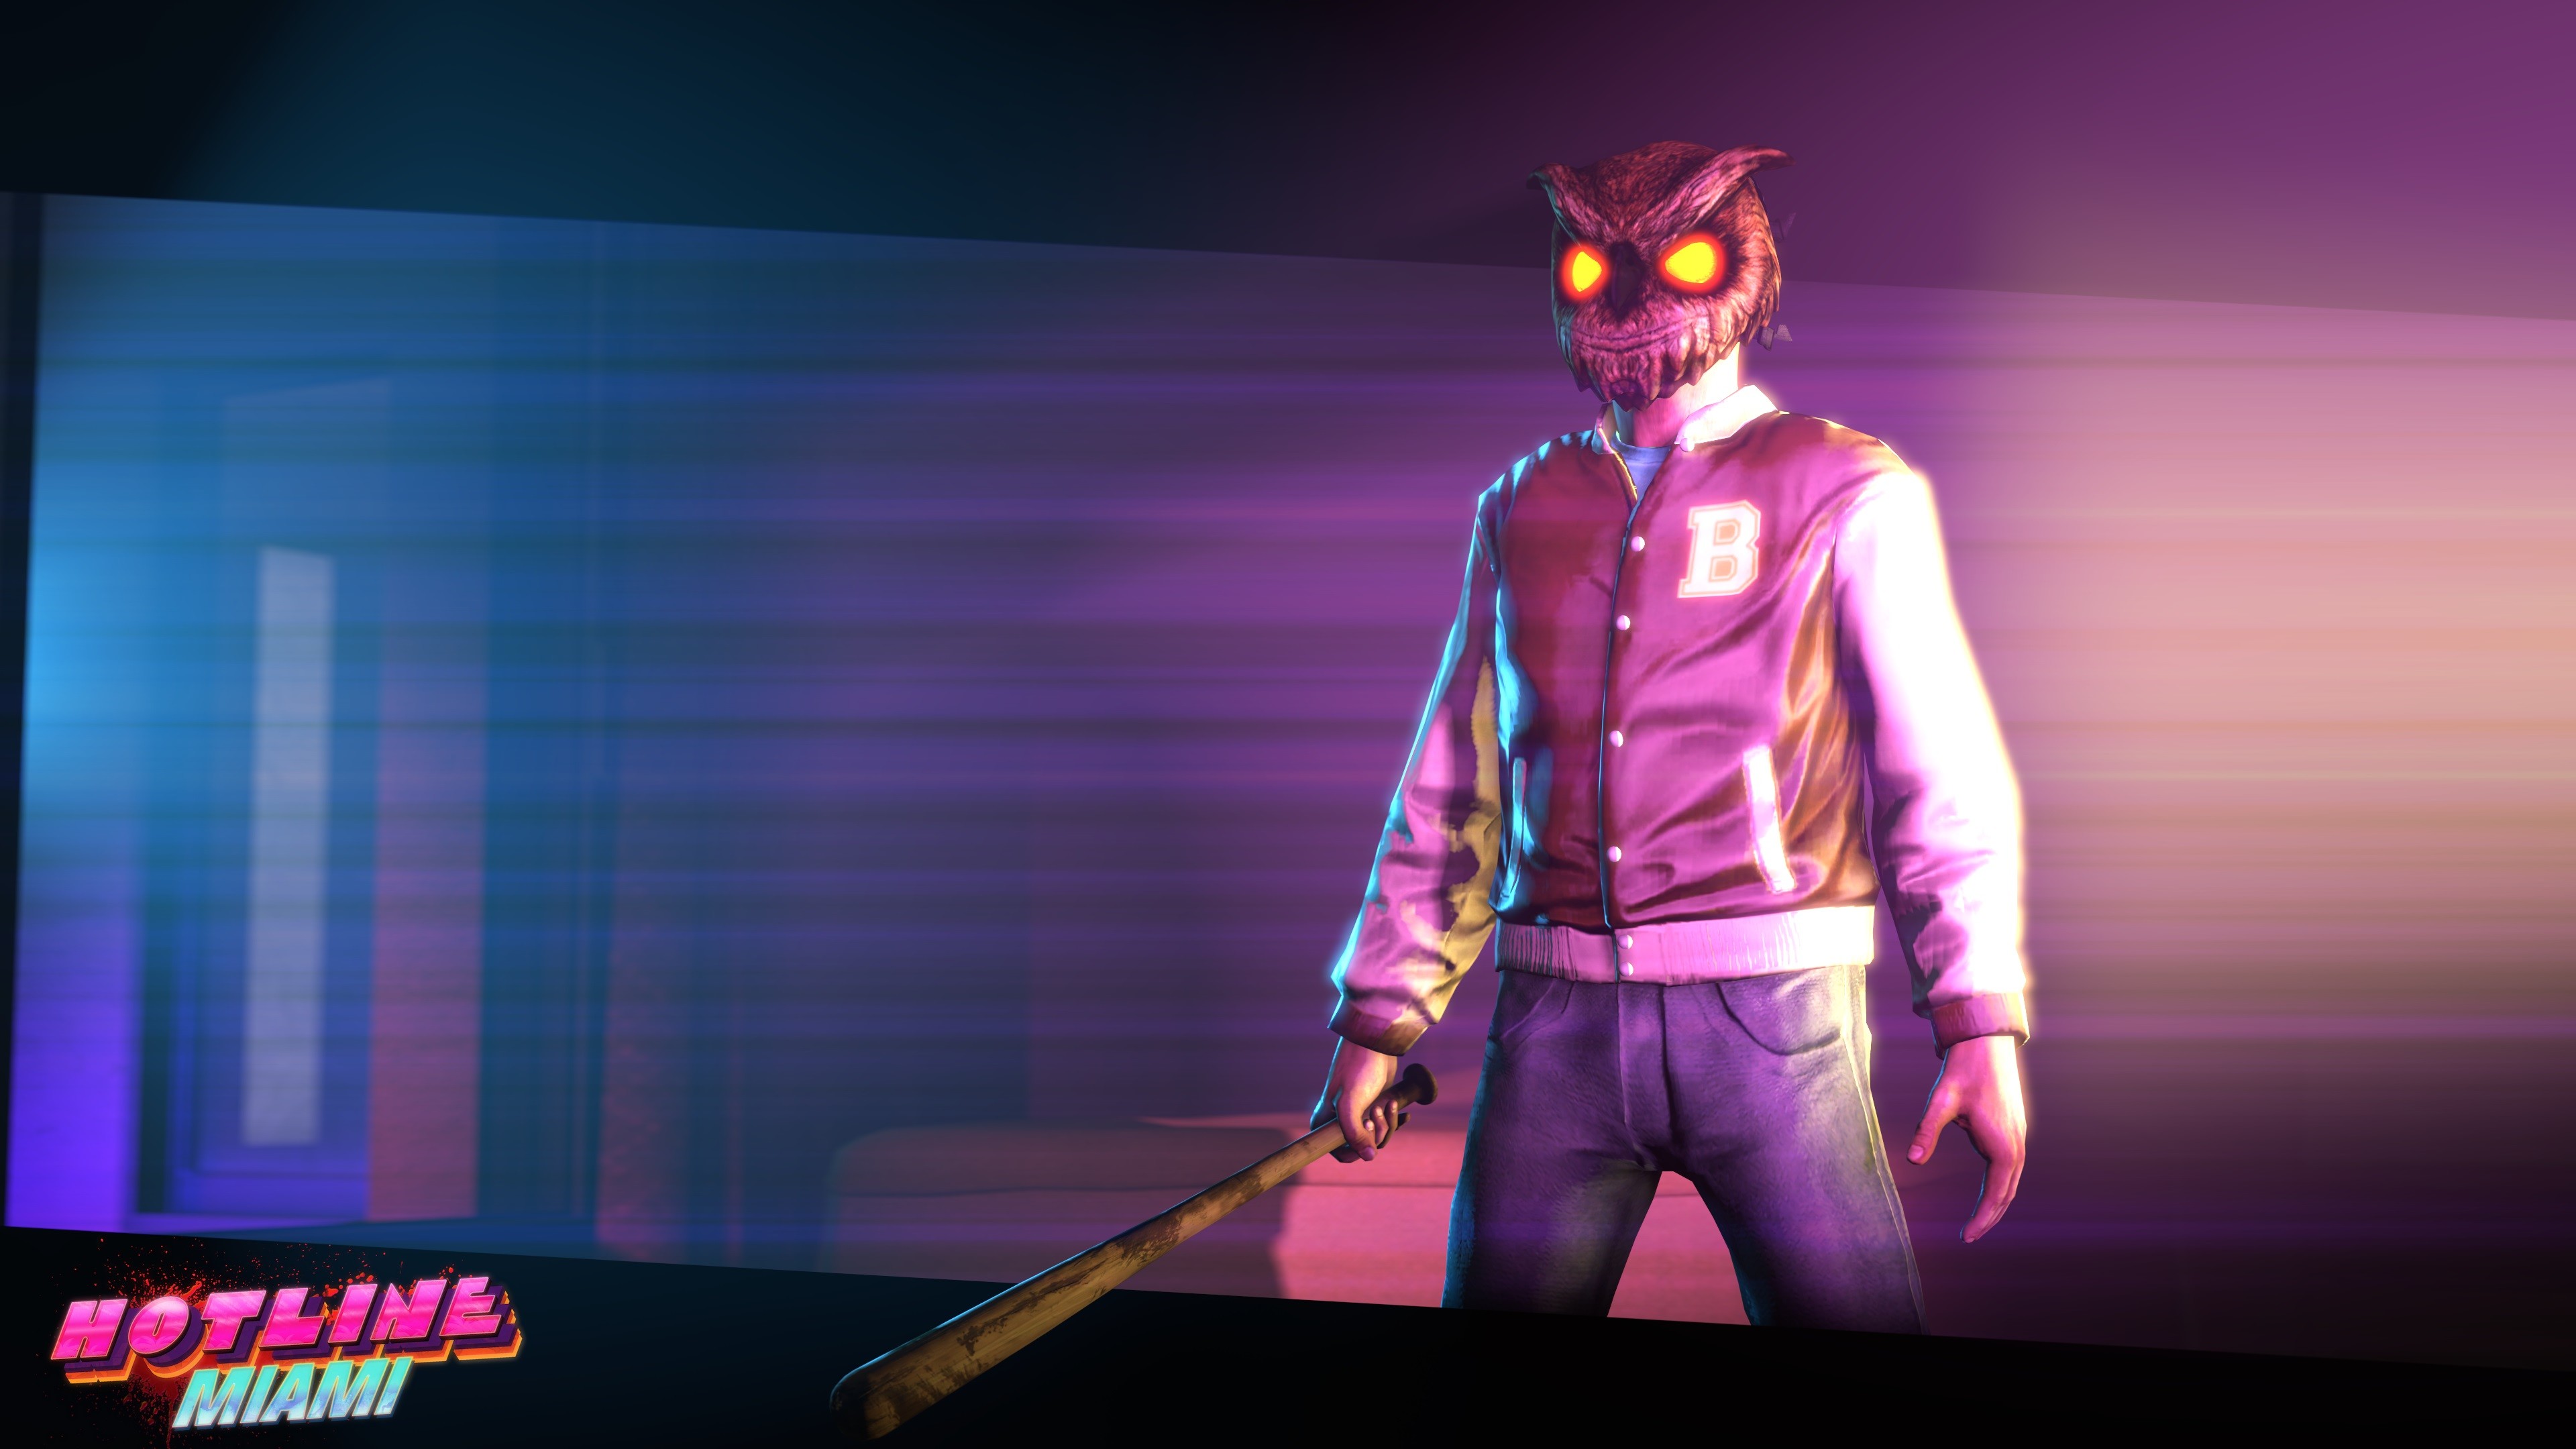 3840x2160 In Lieu of Hotline Miami 2's Release, I Made Two Wallpapers (X-Post r/SFM)  : HotlineMiami